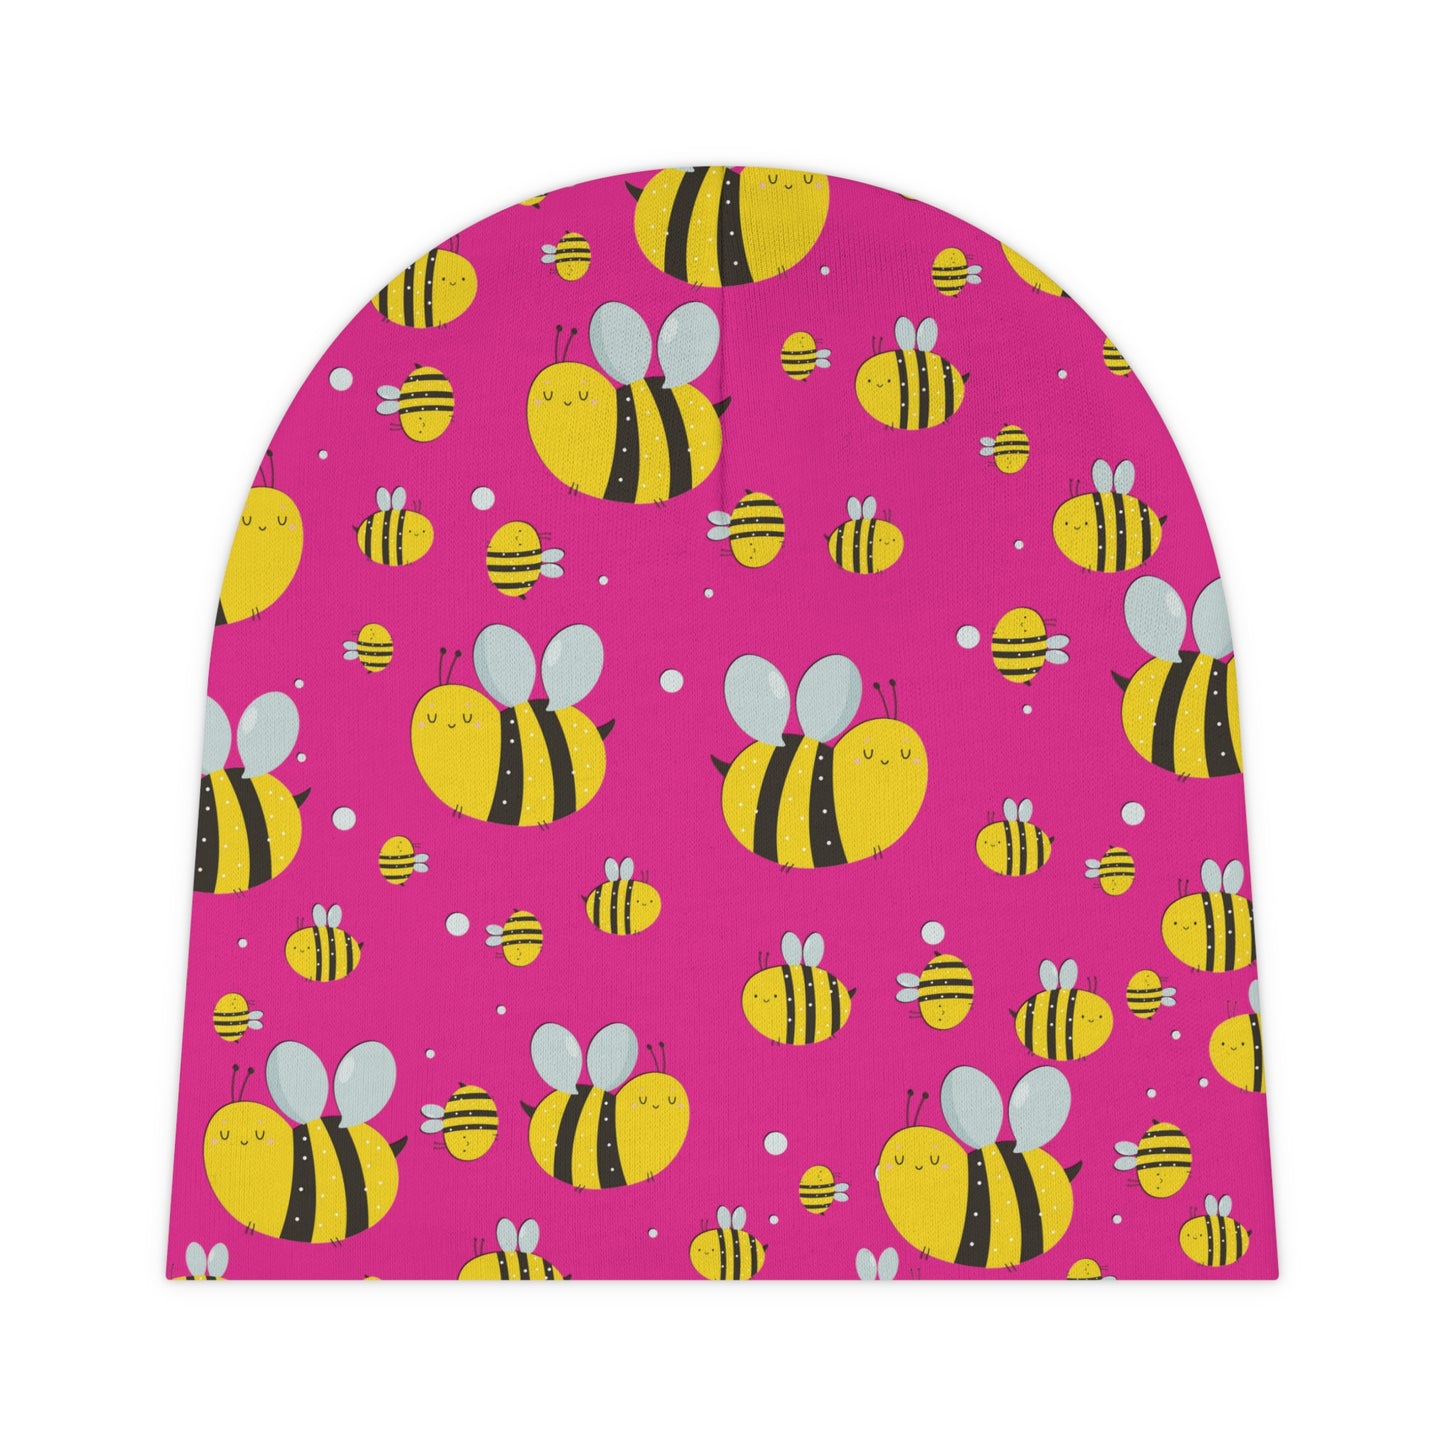 Lots of Bees - Mean Girls Lipstick ff00a8 - Baby Beanie (AOP)